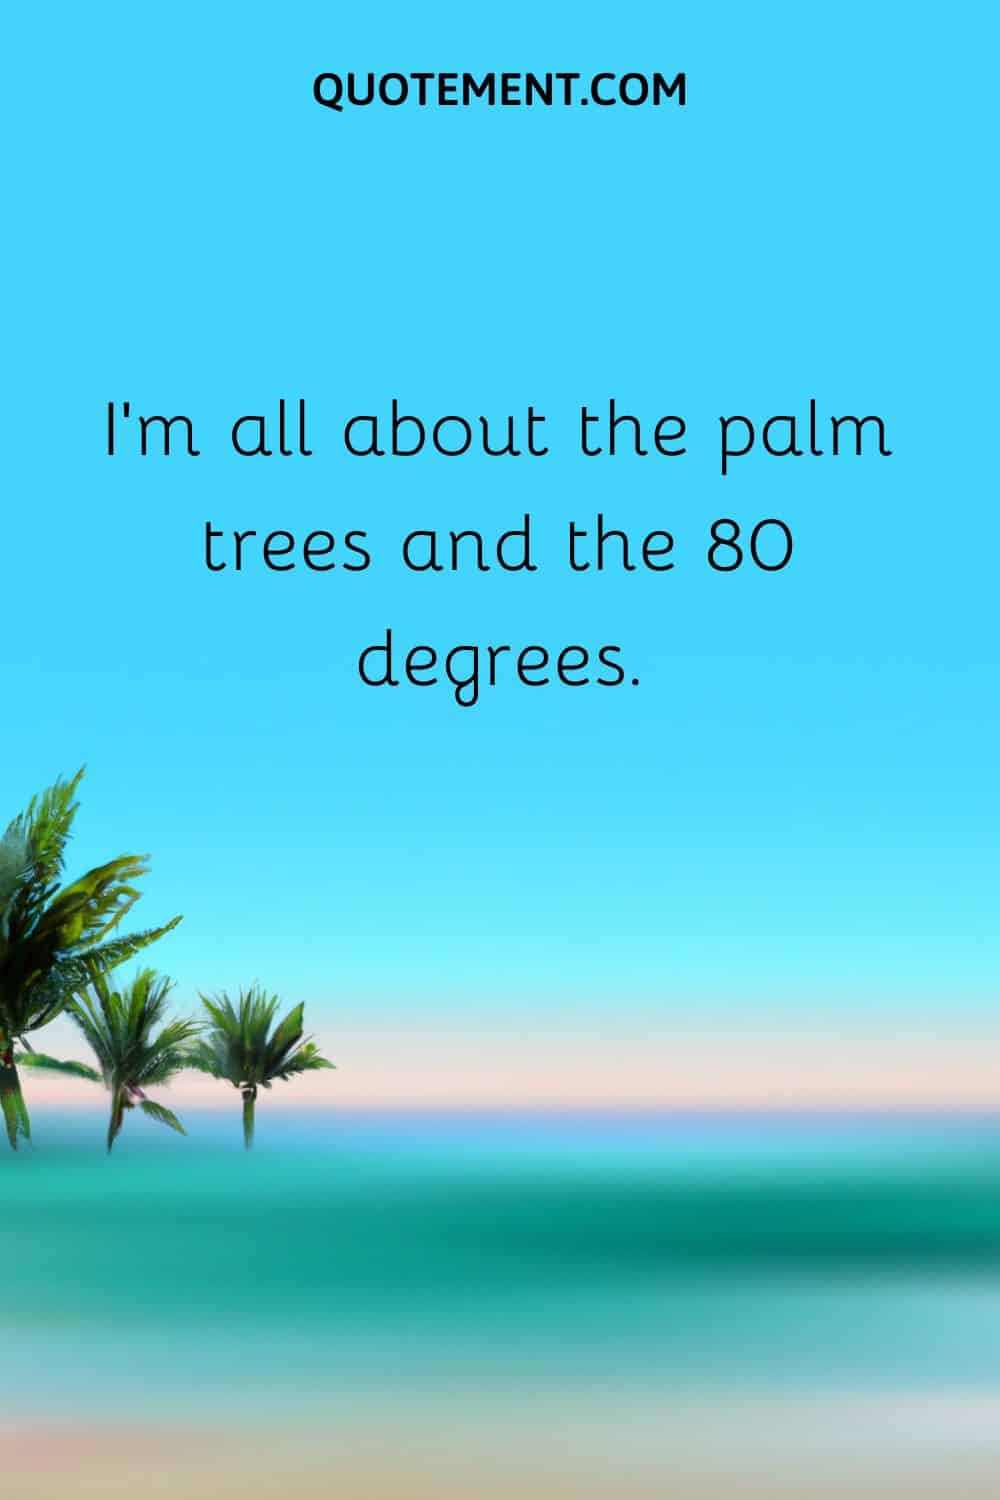 I’m all about the palm trees and the 80 degrees